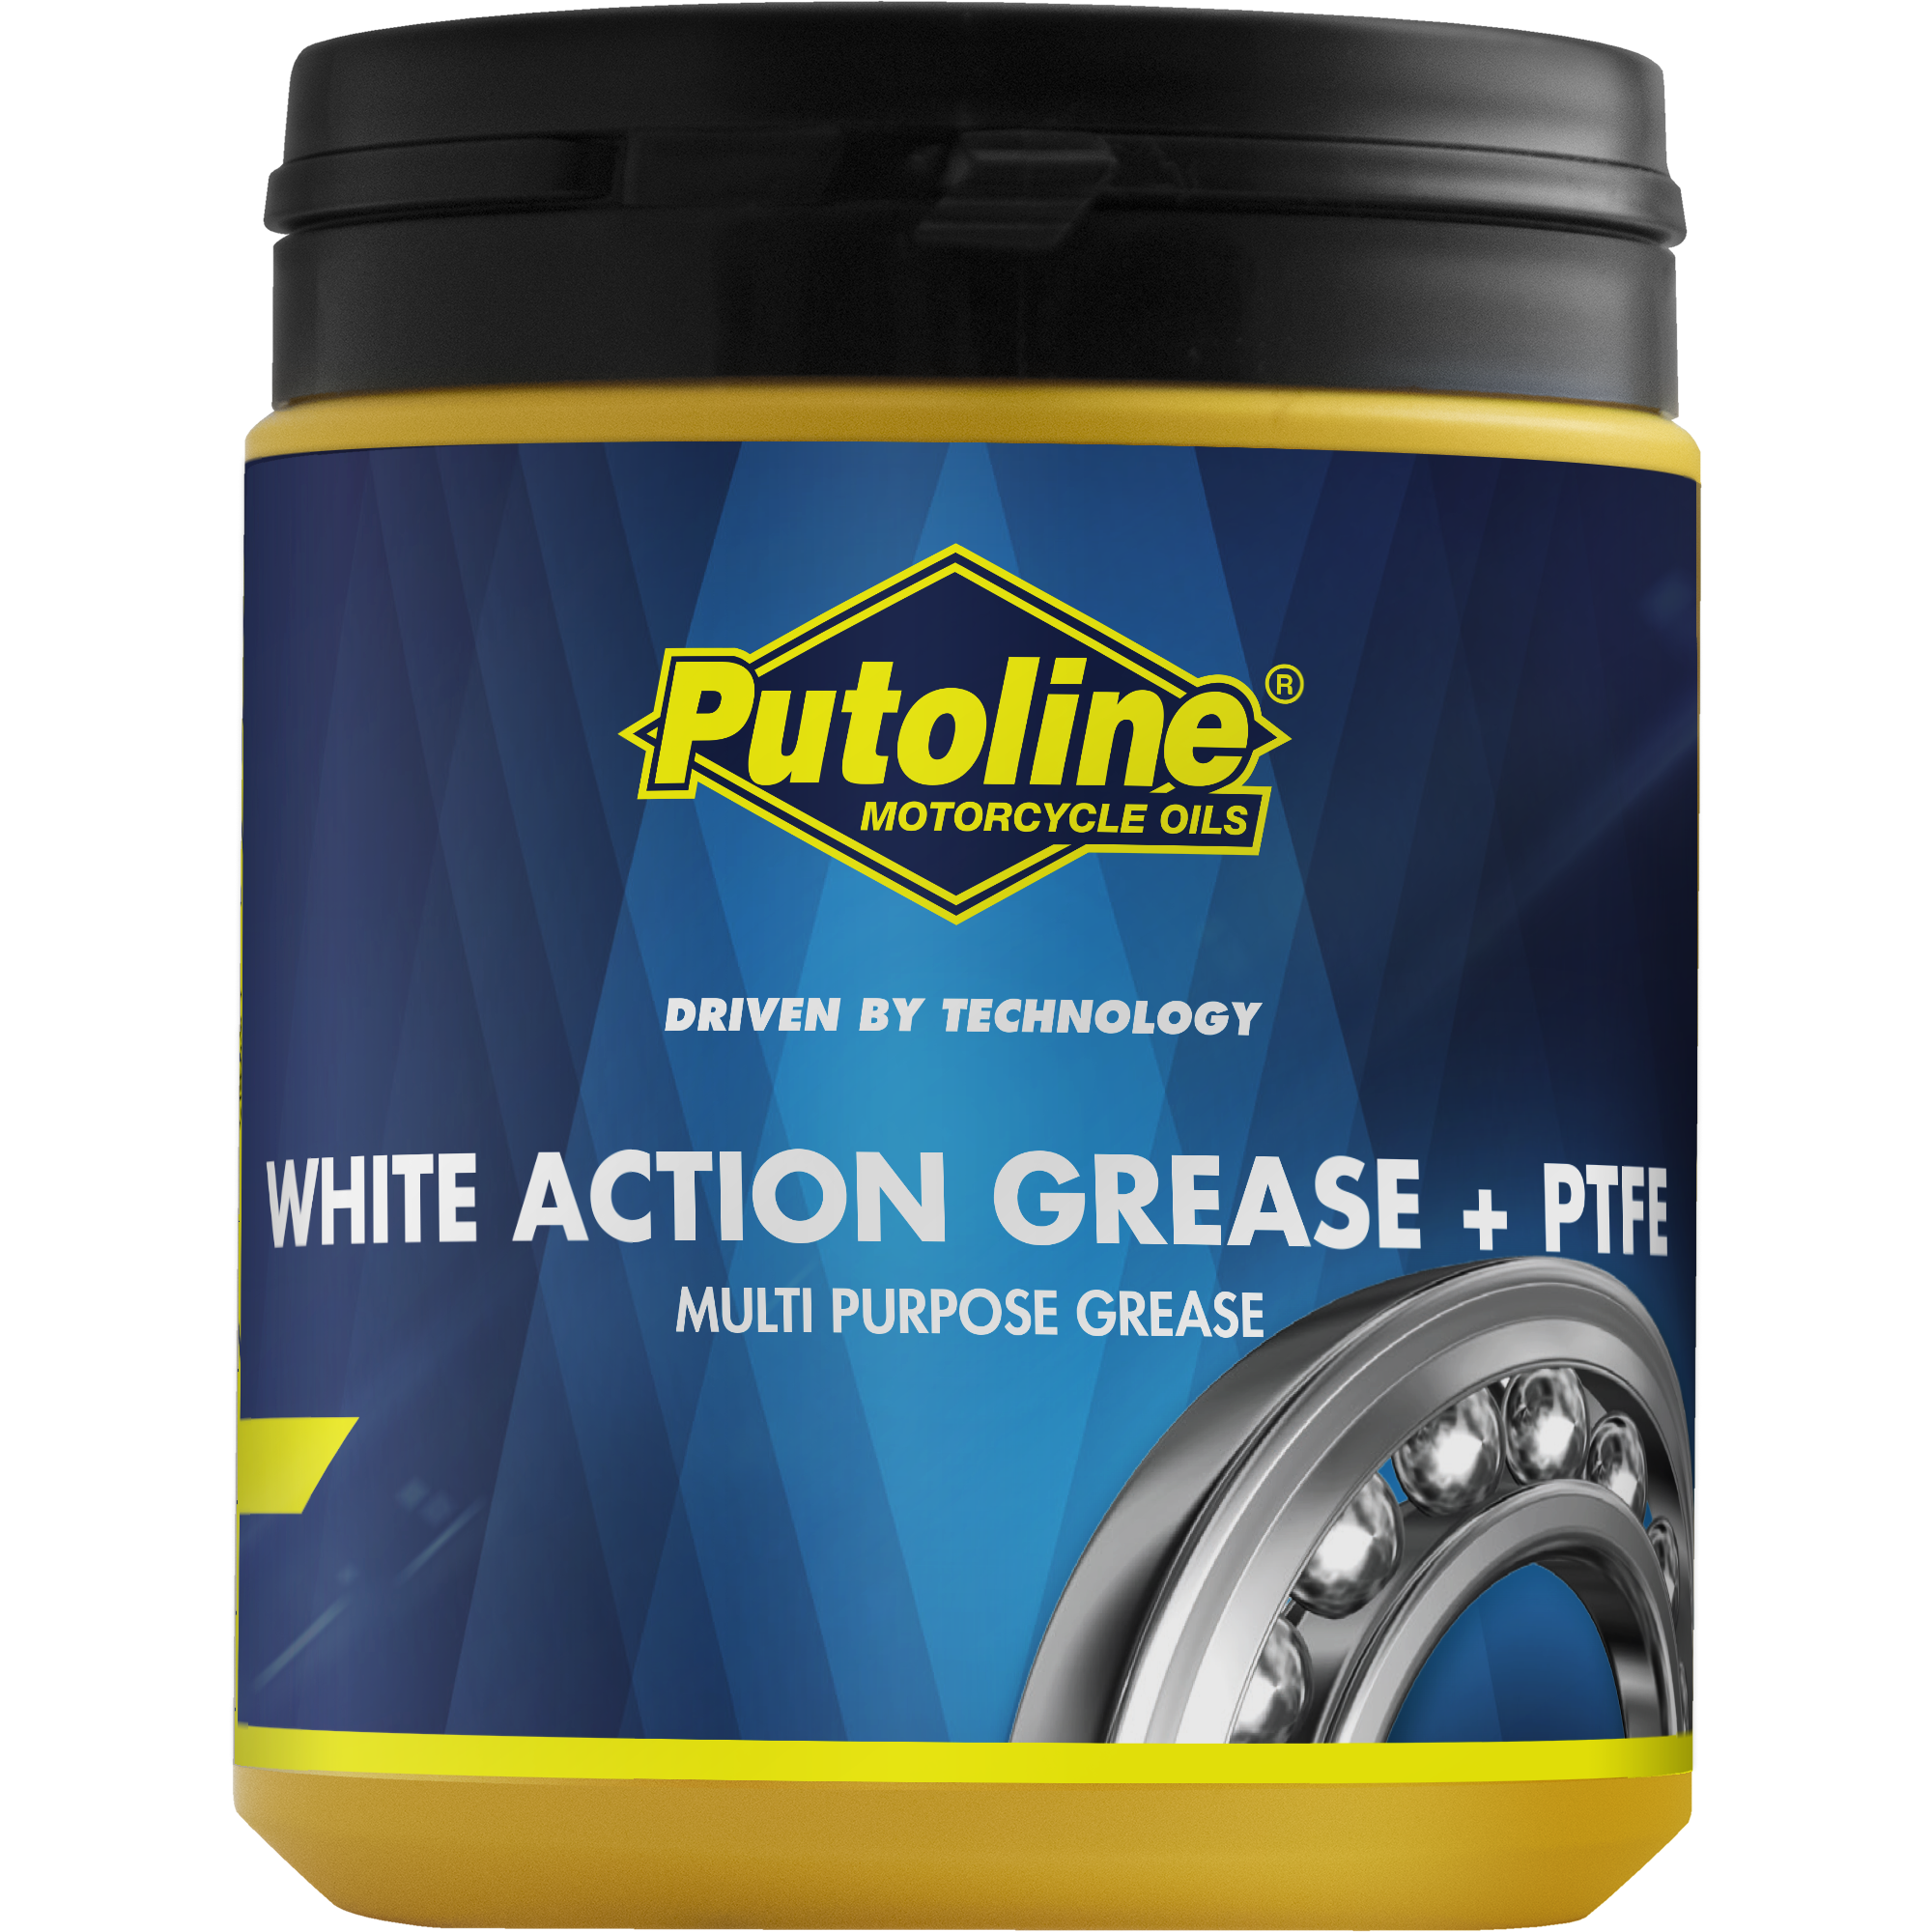 Putoline White Action Grease + PTFE, 600 gr